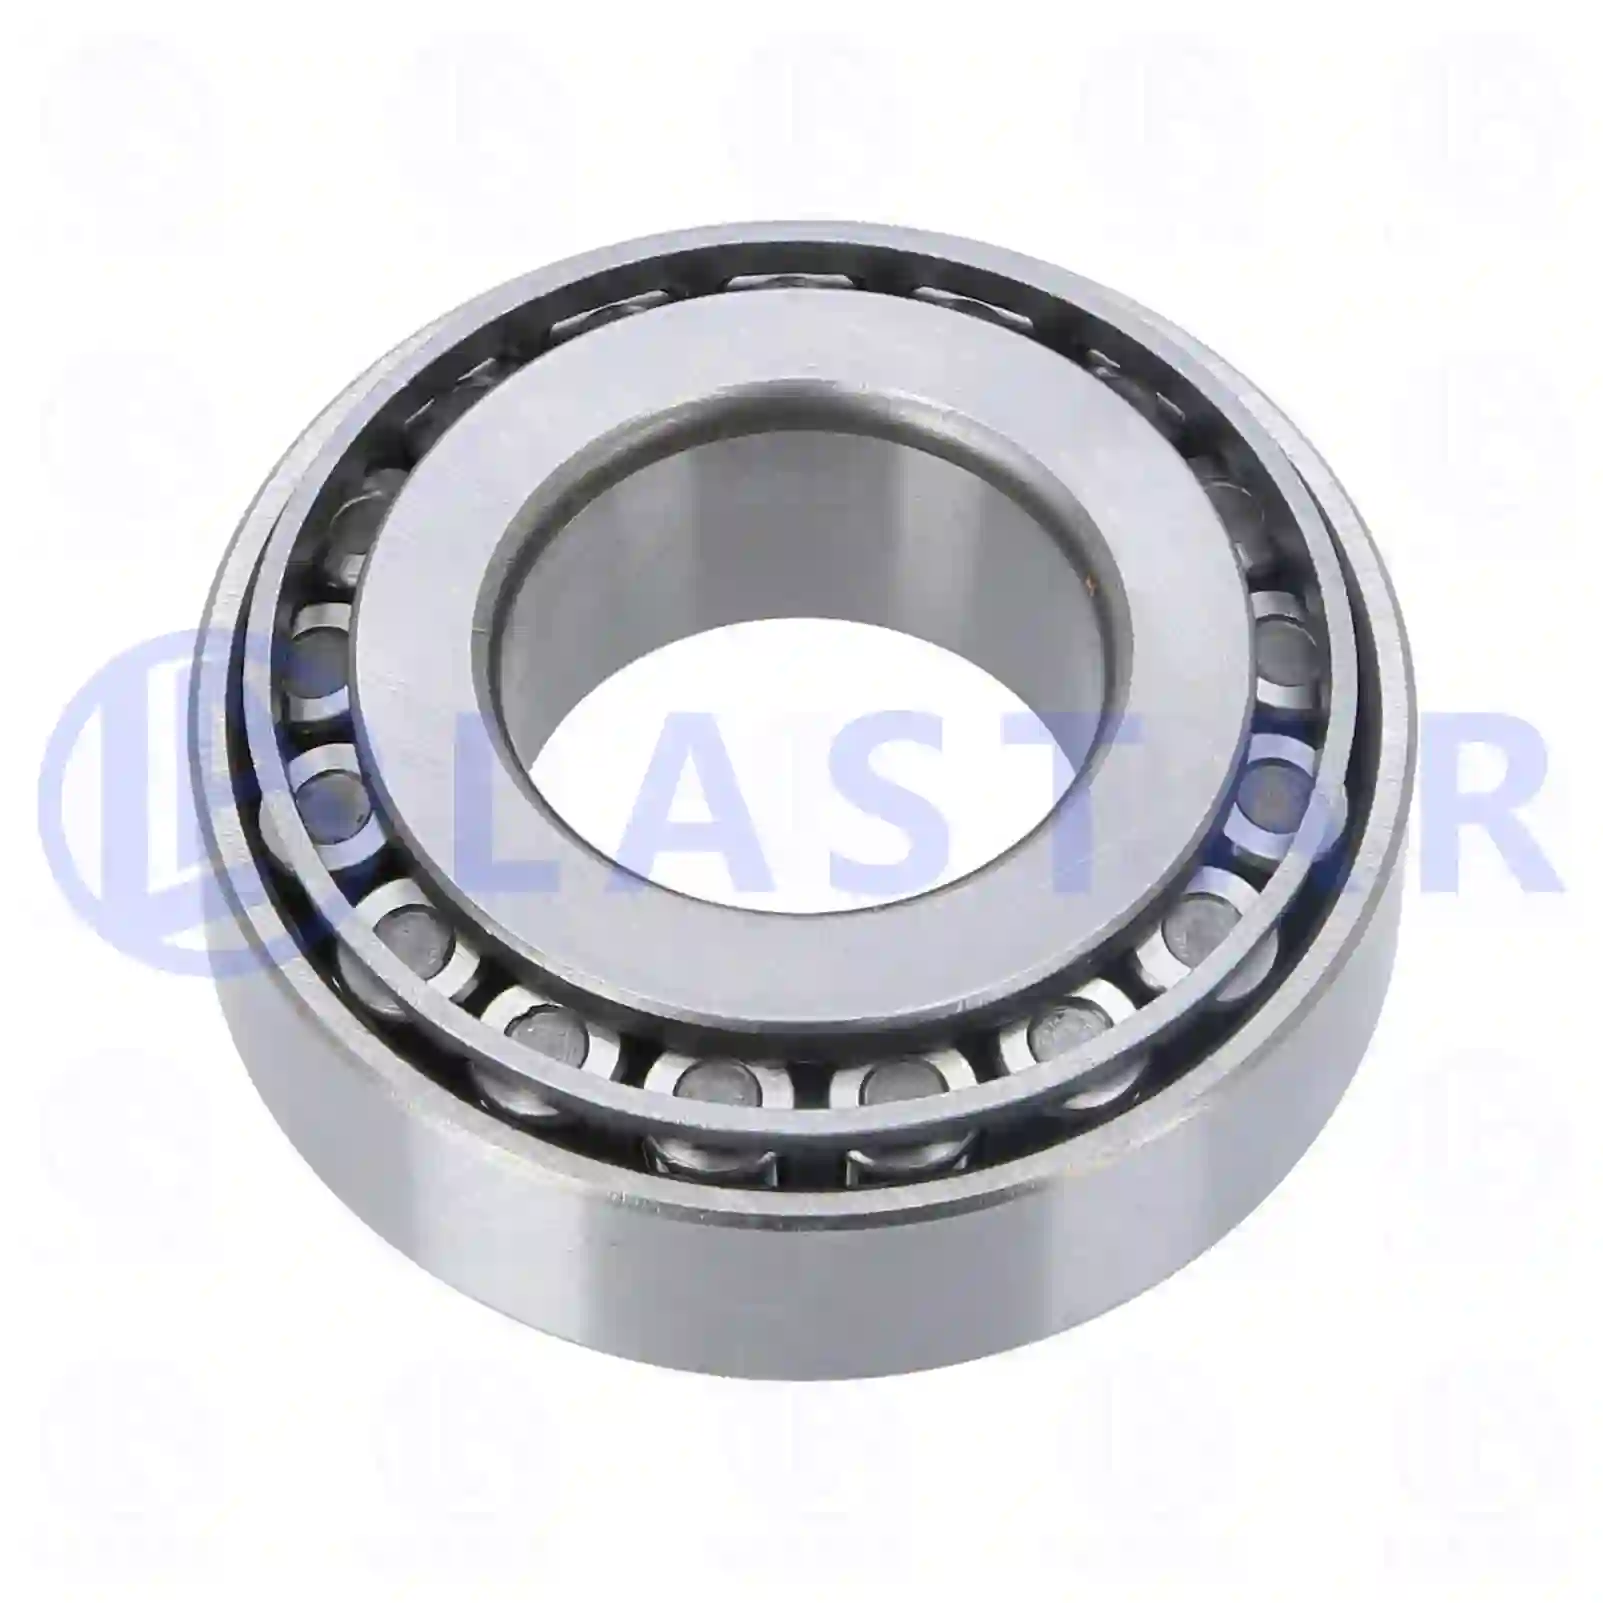 Bearings Tapered roller bearing, la no: 77724607 ,  oem no:0264053500, MA111370, MB025345, MB035007, MB393956, 15919, 005092244, 1440637X1, TK004209923, TK4209923, 12337579, 94032099, 94248083, 988435105, 988435105A, 988435109, 988435109A, SZ36635005, 91007-P5D-007, 91007-PY4-003, 53232-11000, 8-12337579-0, 8-94248083-0, 8-94248083-1, 9-00093172-0, 26800130, 00221-27210, 06324990068, 06324990079, 81934200064, 87523300200, A0773220700, 022127141, 0221271410, 022127210, 055933075, 075527141, 000720032207, 0089817405, 0089817605, 2506263031, 250626303101, 3199810005, MA111370, MB0025345, MB025345, MB035007, MB393956, 32219-9X501, 40210-F3900, 0023432207, 0959232207, 0959532207, 5000388284, 5000388401, 5010241918, 5516010573, 7701465647, 7703090093, 202635, 183684, 19577, ZG02971-0008 Lastar Spare Part | Truck Spare Parts, Auotomotive Spare Parts